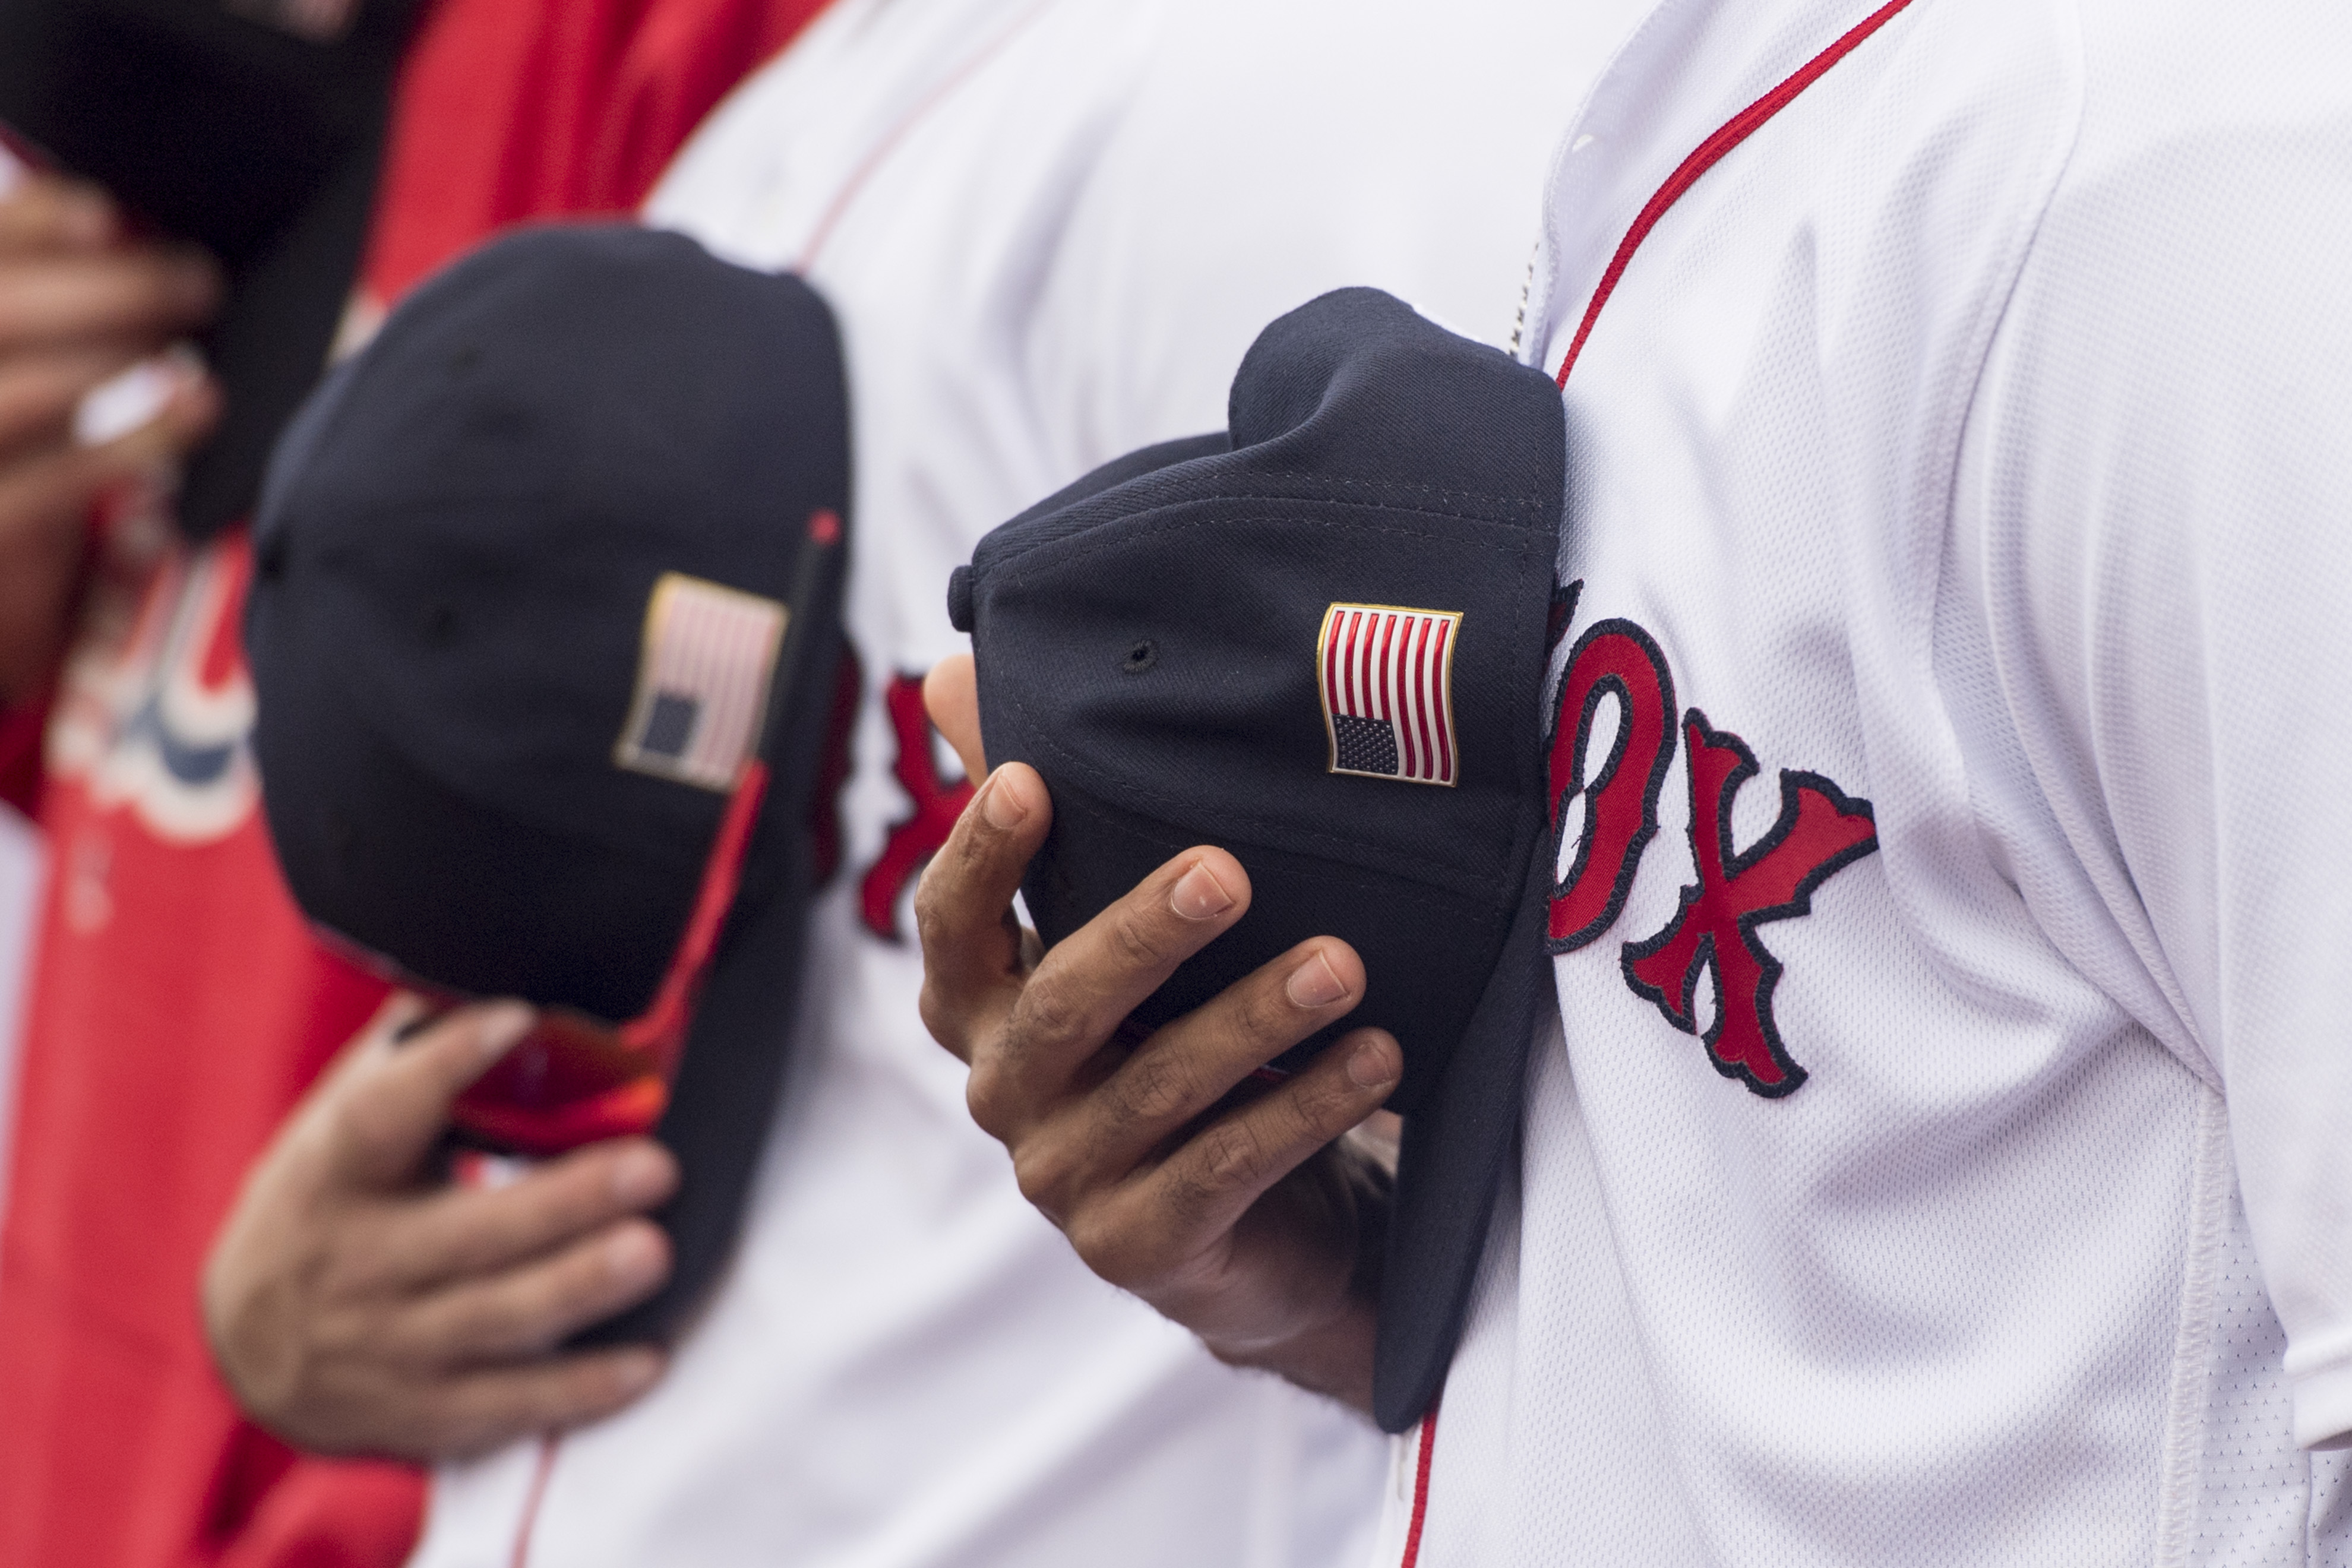 An American flag patch is shown on a cap before a game between the Boston Red Sox and the Tampa Bay Rays on September 10, 2017 at Fenway Park in Boston, Massachusetts. (Photo by Billie Weiss/Boston Red Sox/Getty Images) (Billie Weiss/Boston Red Sox&mdash;Getty Images)